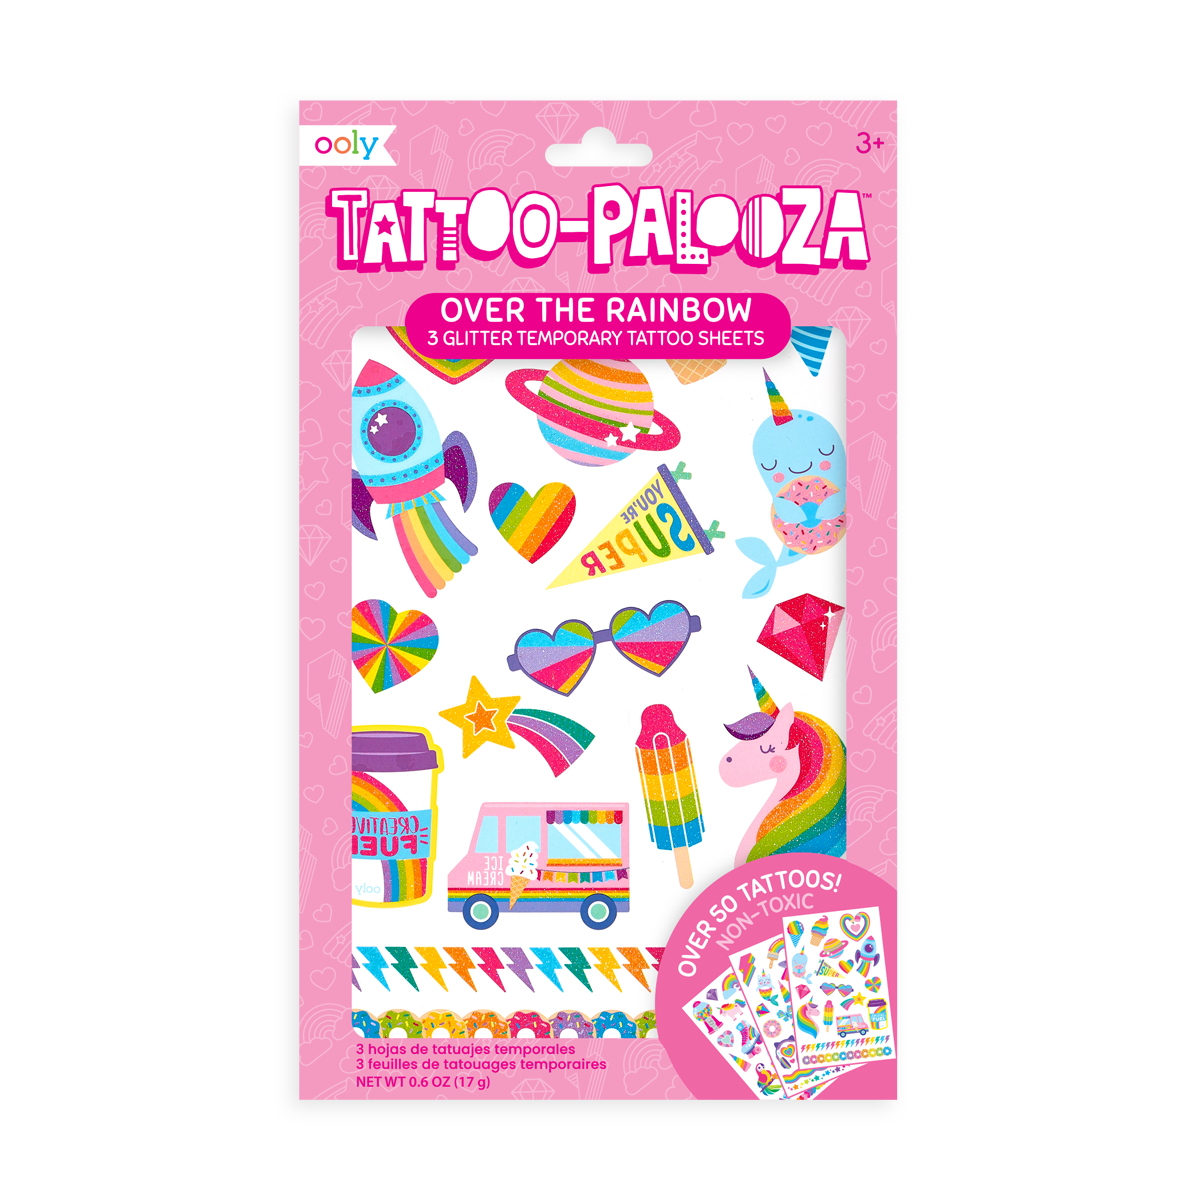 Tattoo-Palooza Temporary Tattoos - Over the Rainbow - in packaging